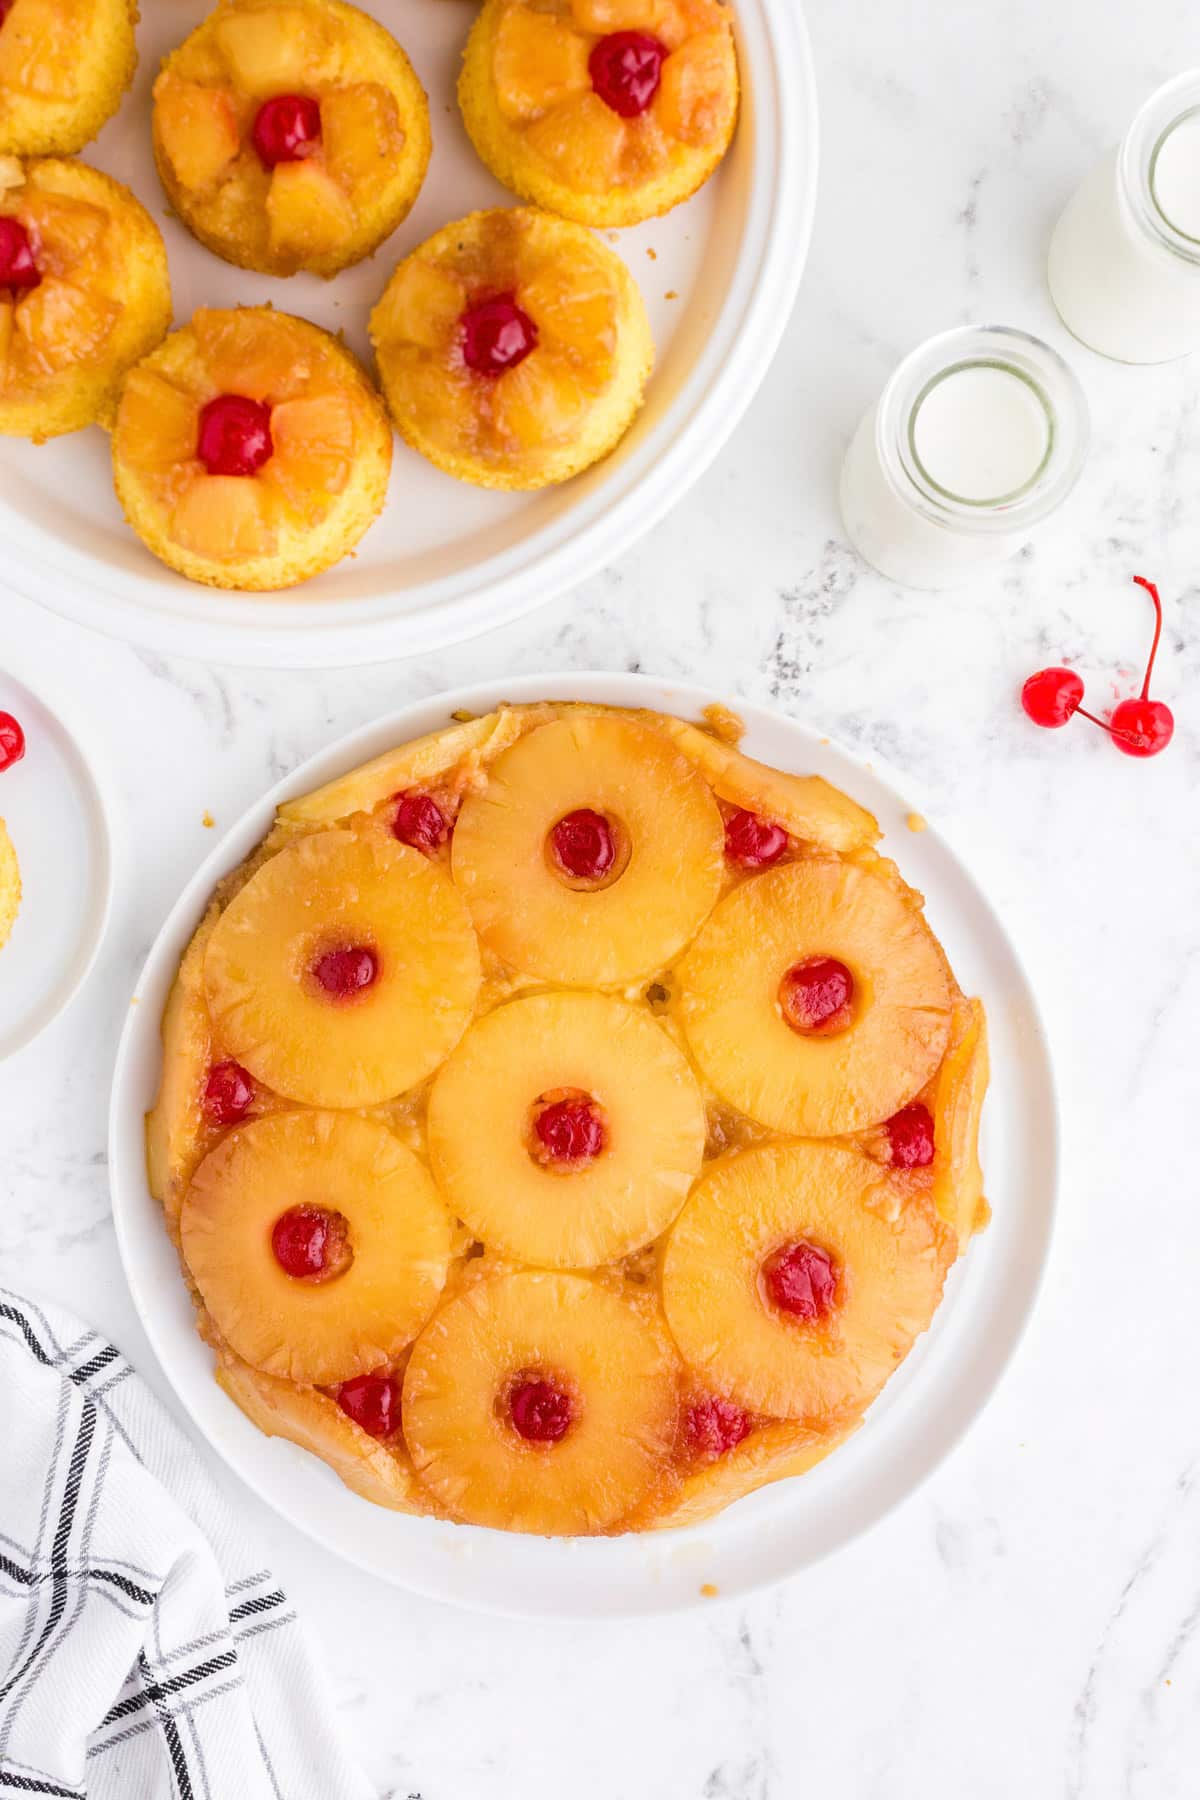 Overhead view of pineapple upside down cake and mini cakes on a white marble countertop.